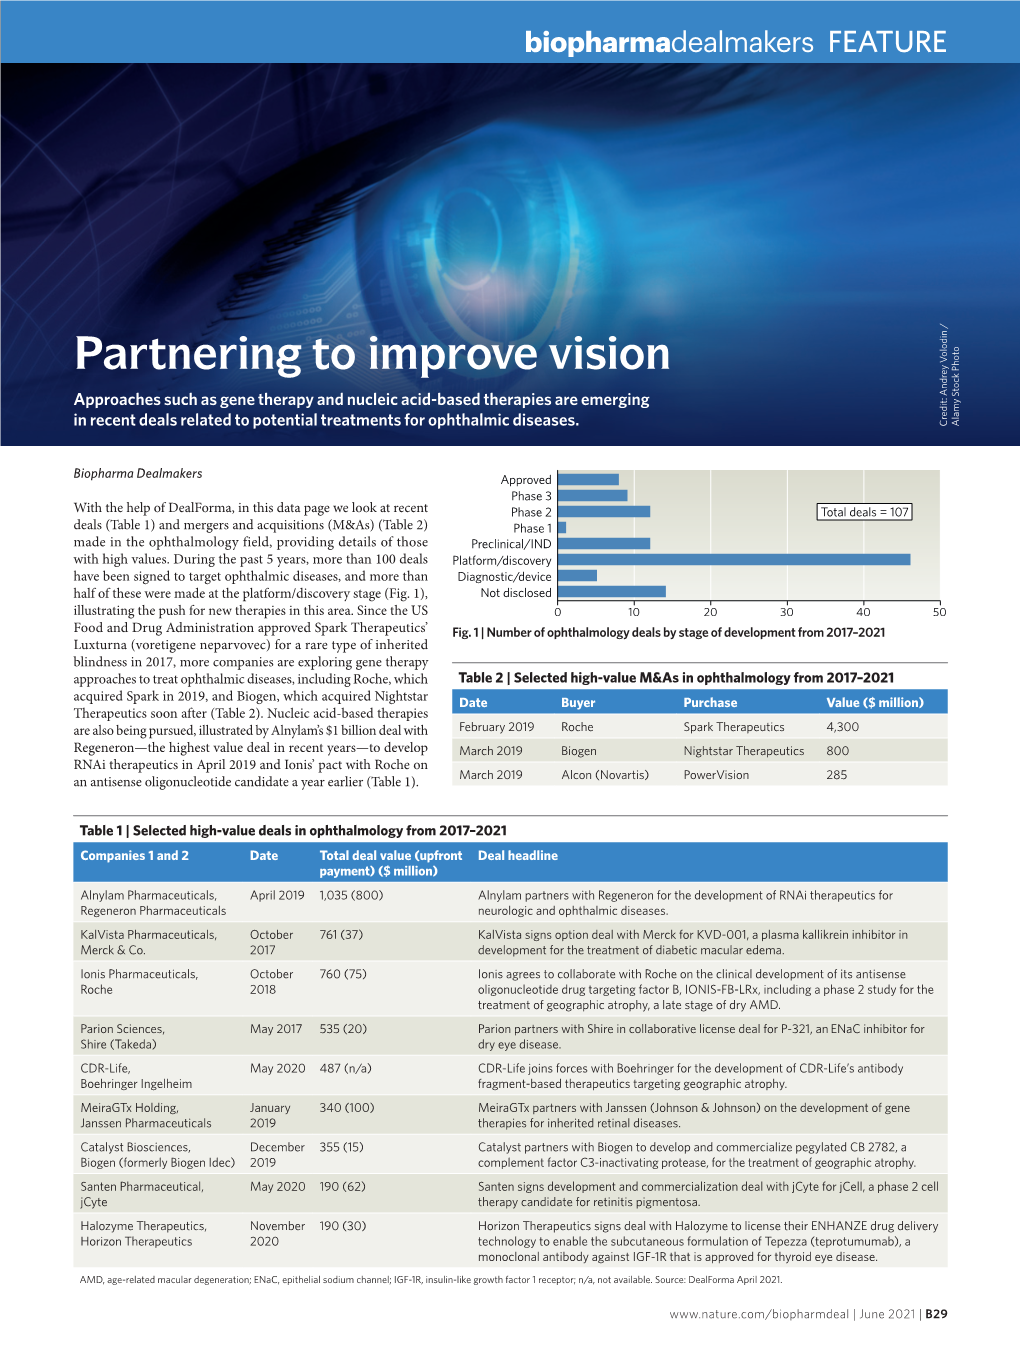 Partnering to Improve Vision AMD, Age-Related Macular Degeneration; Enac,Epithelialsodiumchannel;IGF-1R, Insulin-Like Growth Factor 1Receptor; N/A, Notavailable